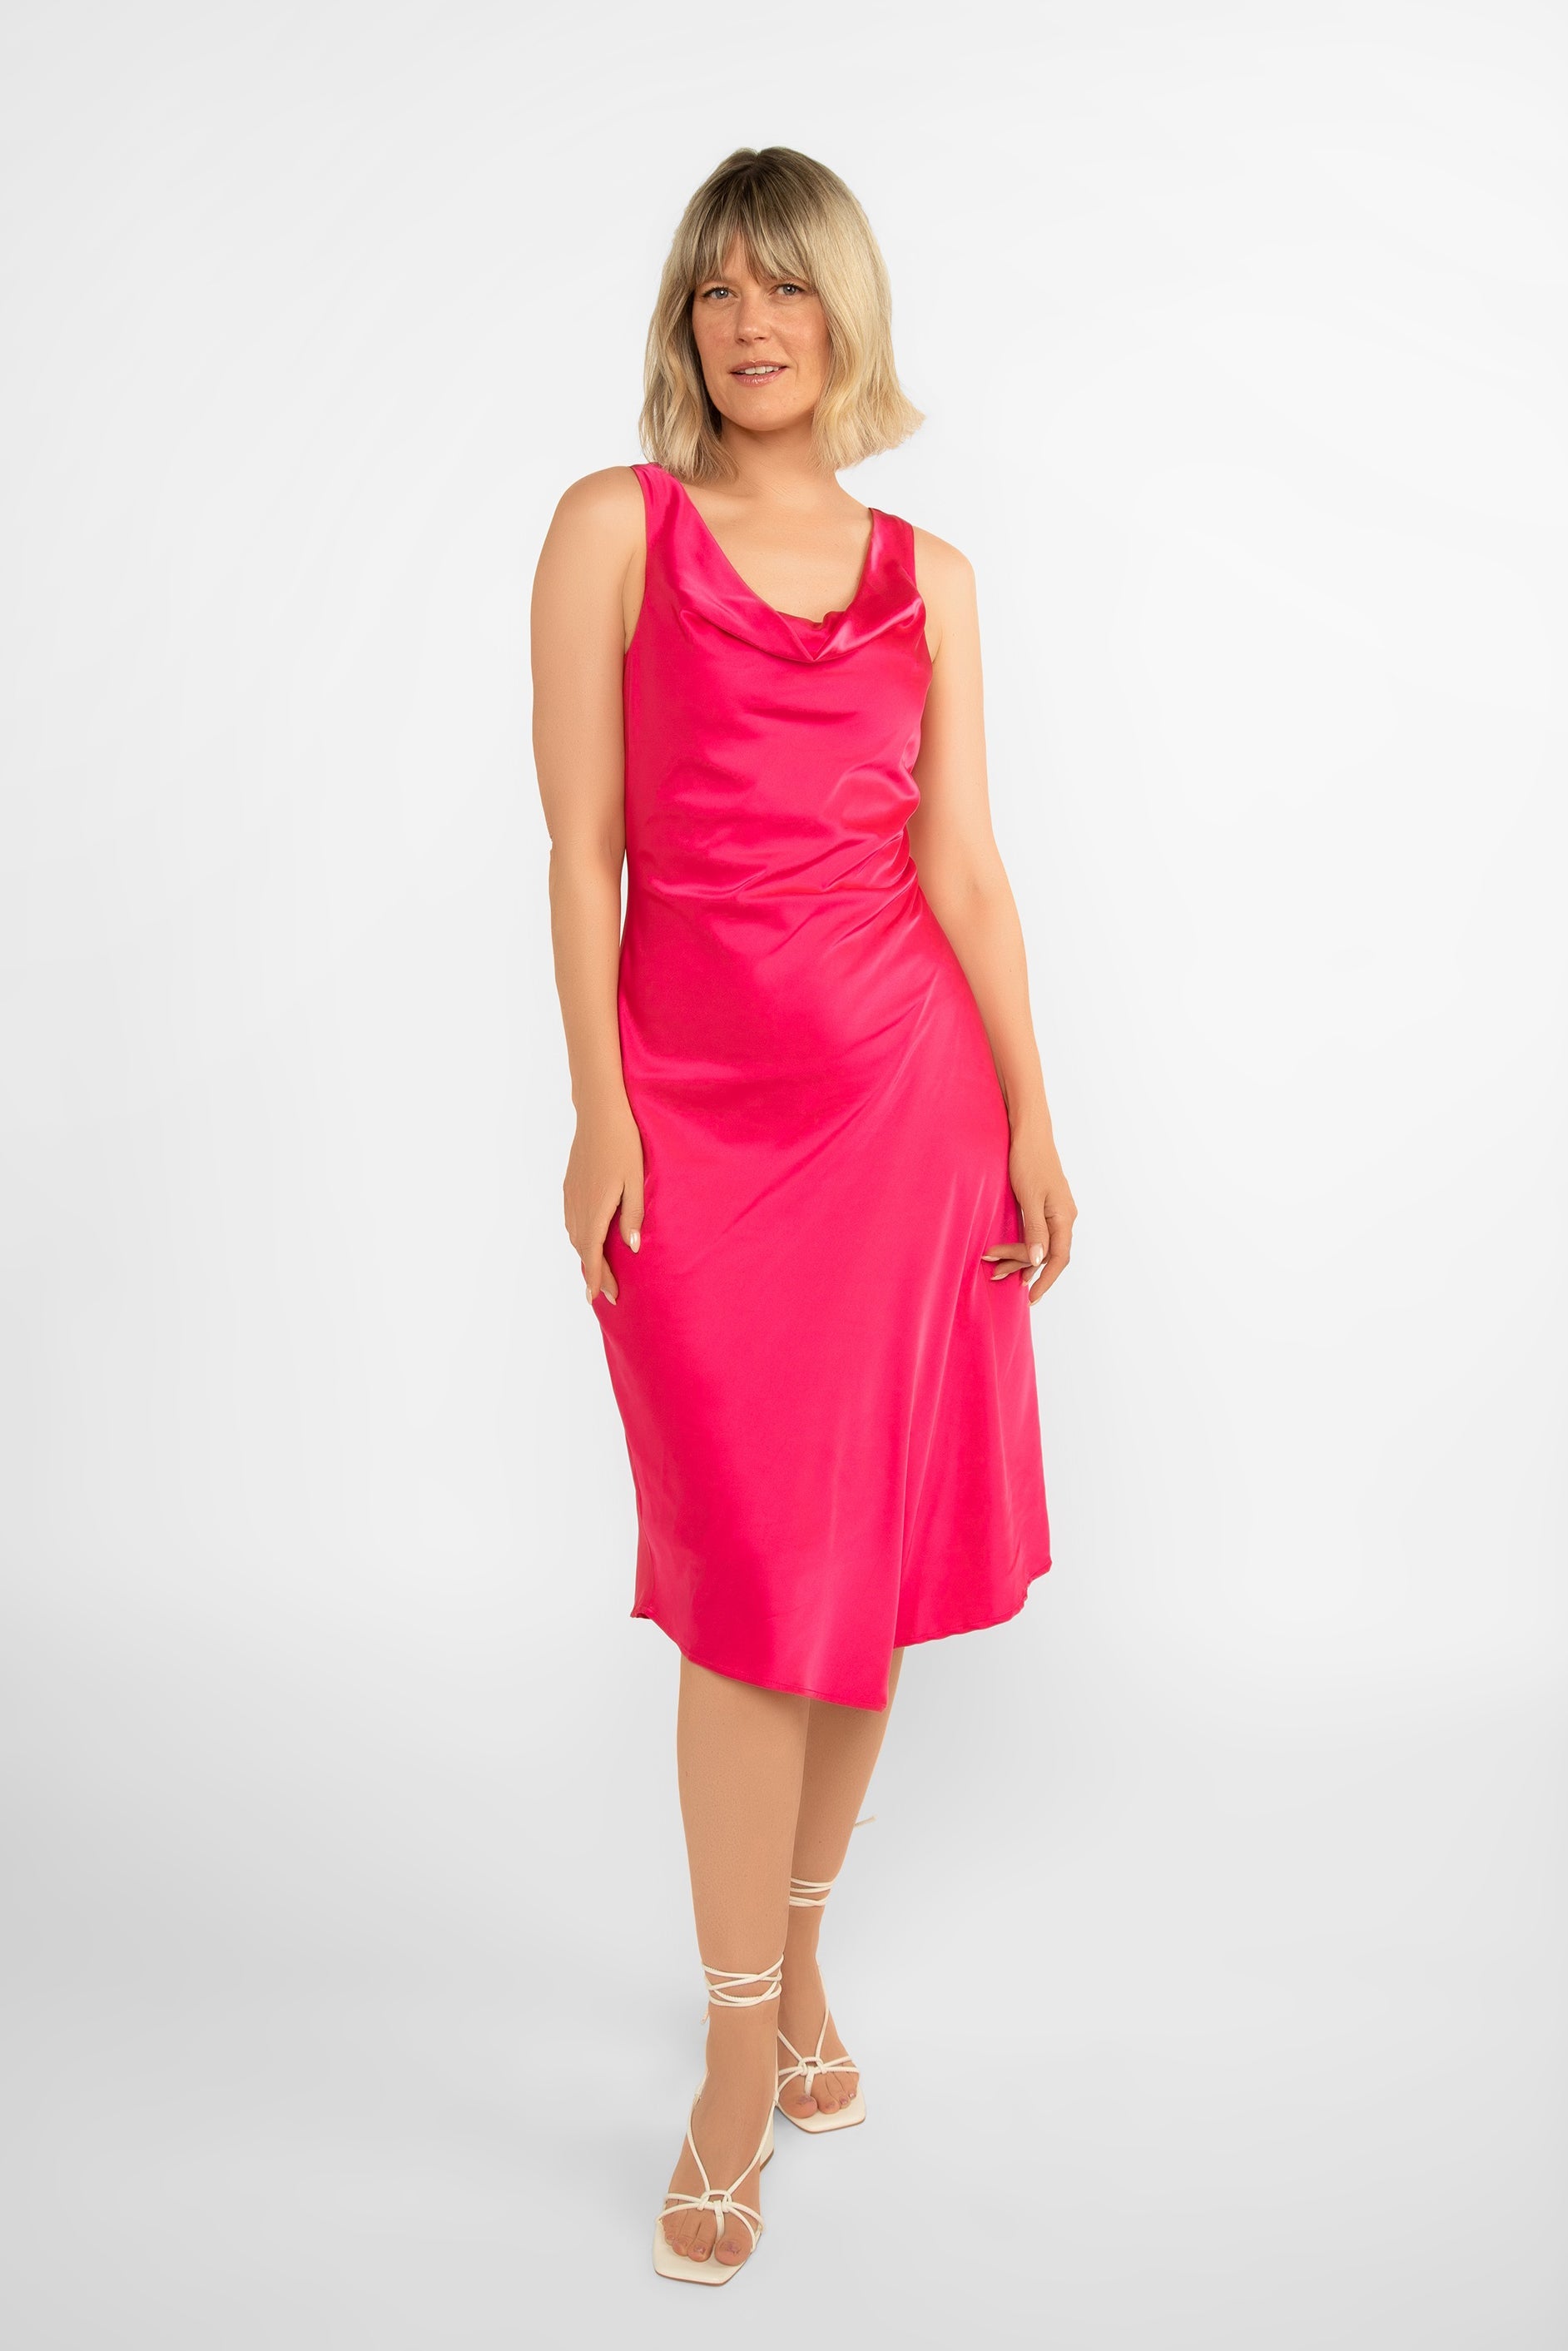 LATE (DR-6918391) Women's Sleeveless Cowlneck Fit and Flare Satin Midi Dress in Pink